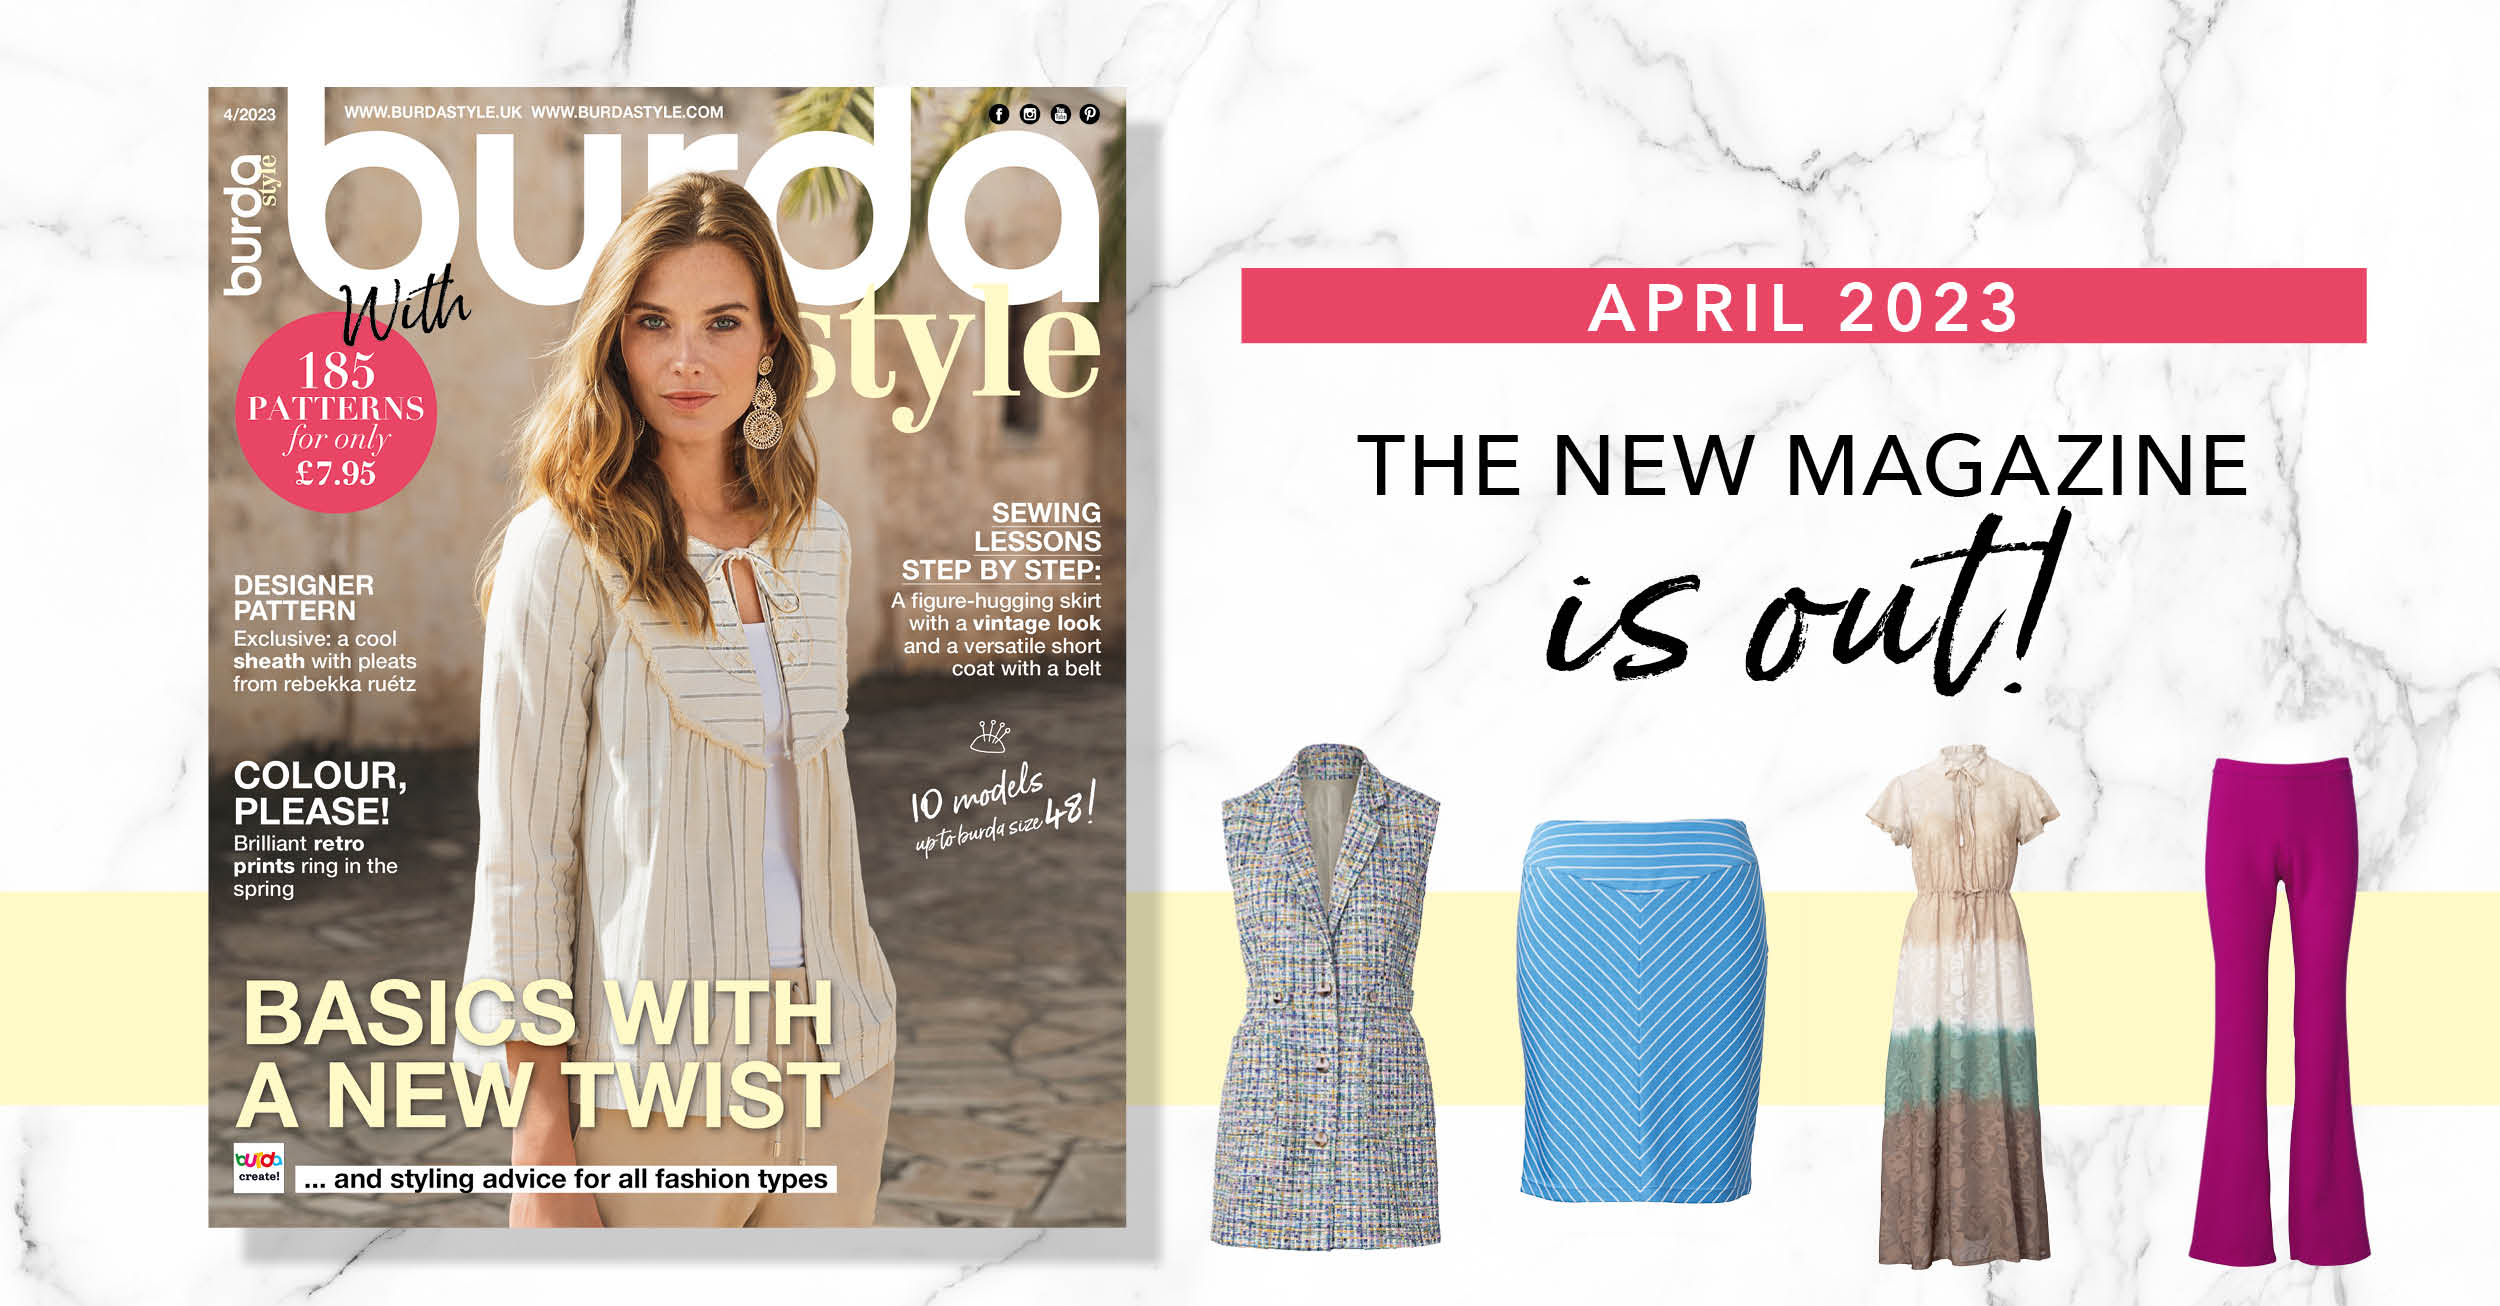 April 2023: The April 2023 Issue of Burda Style Is Out!